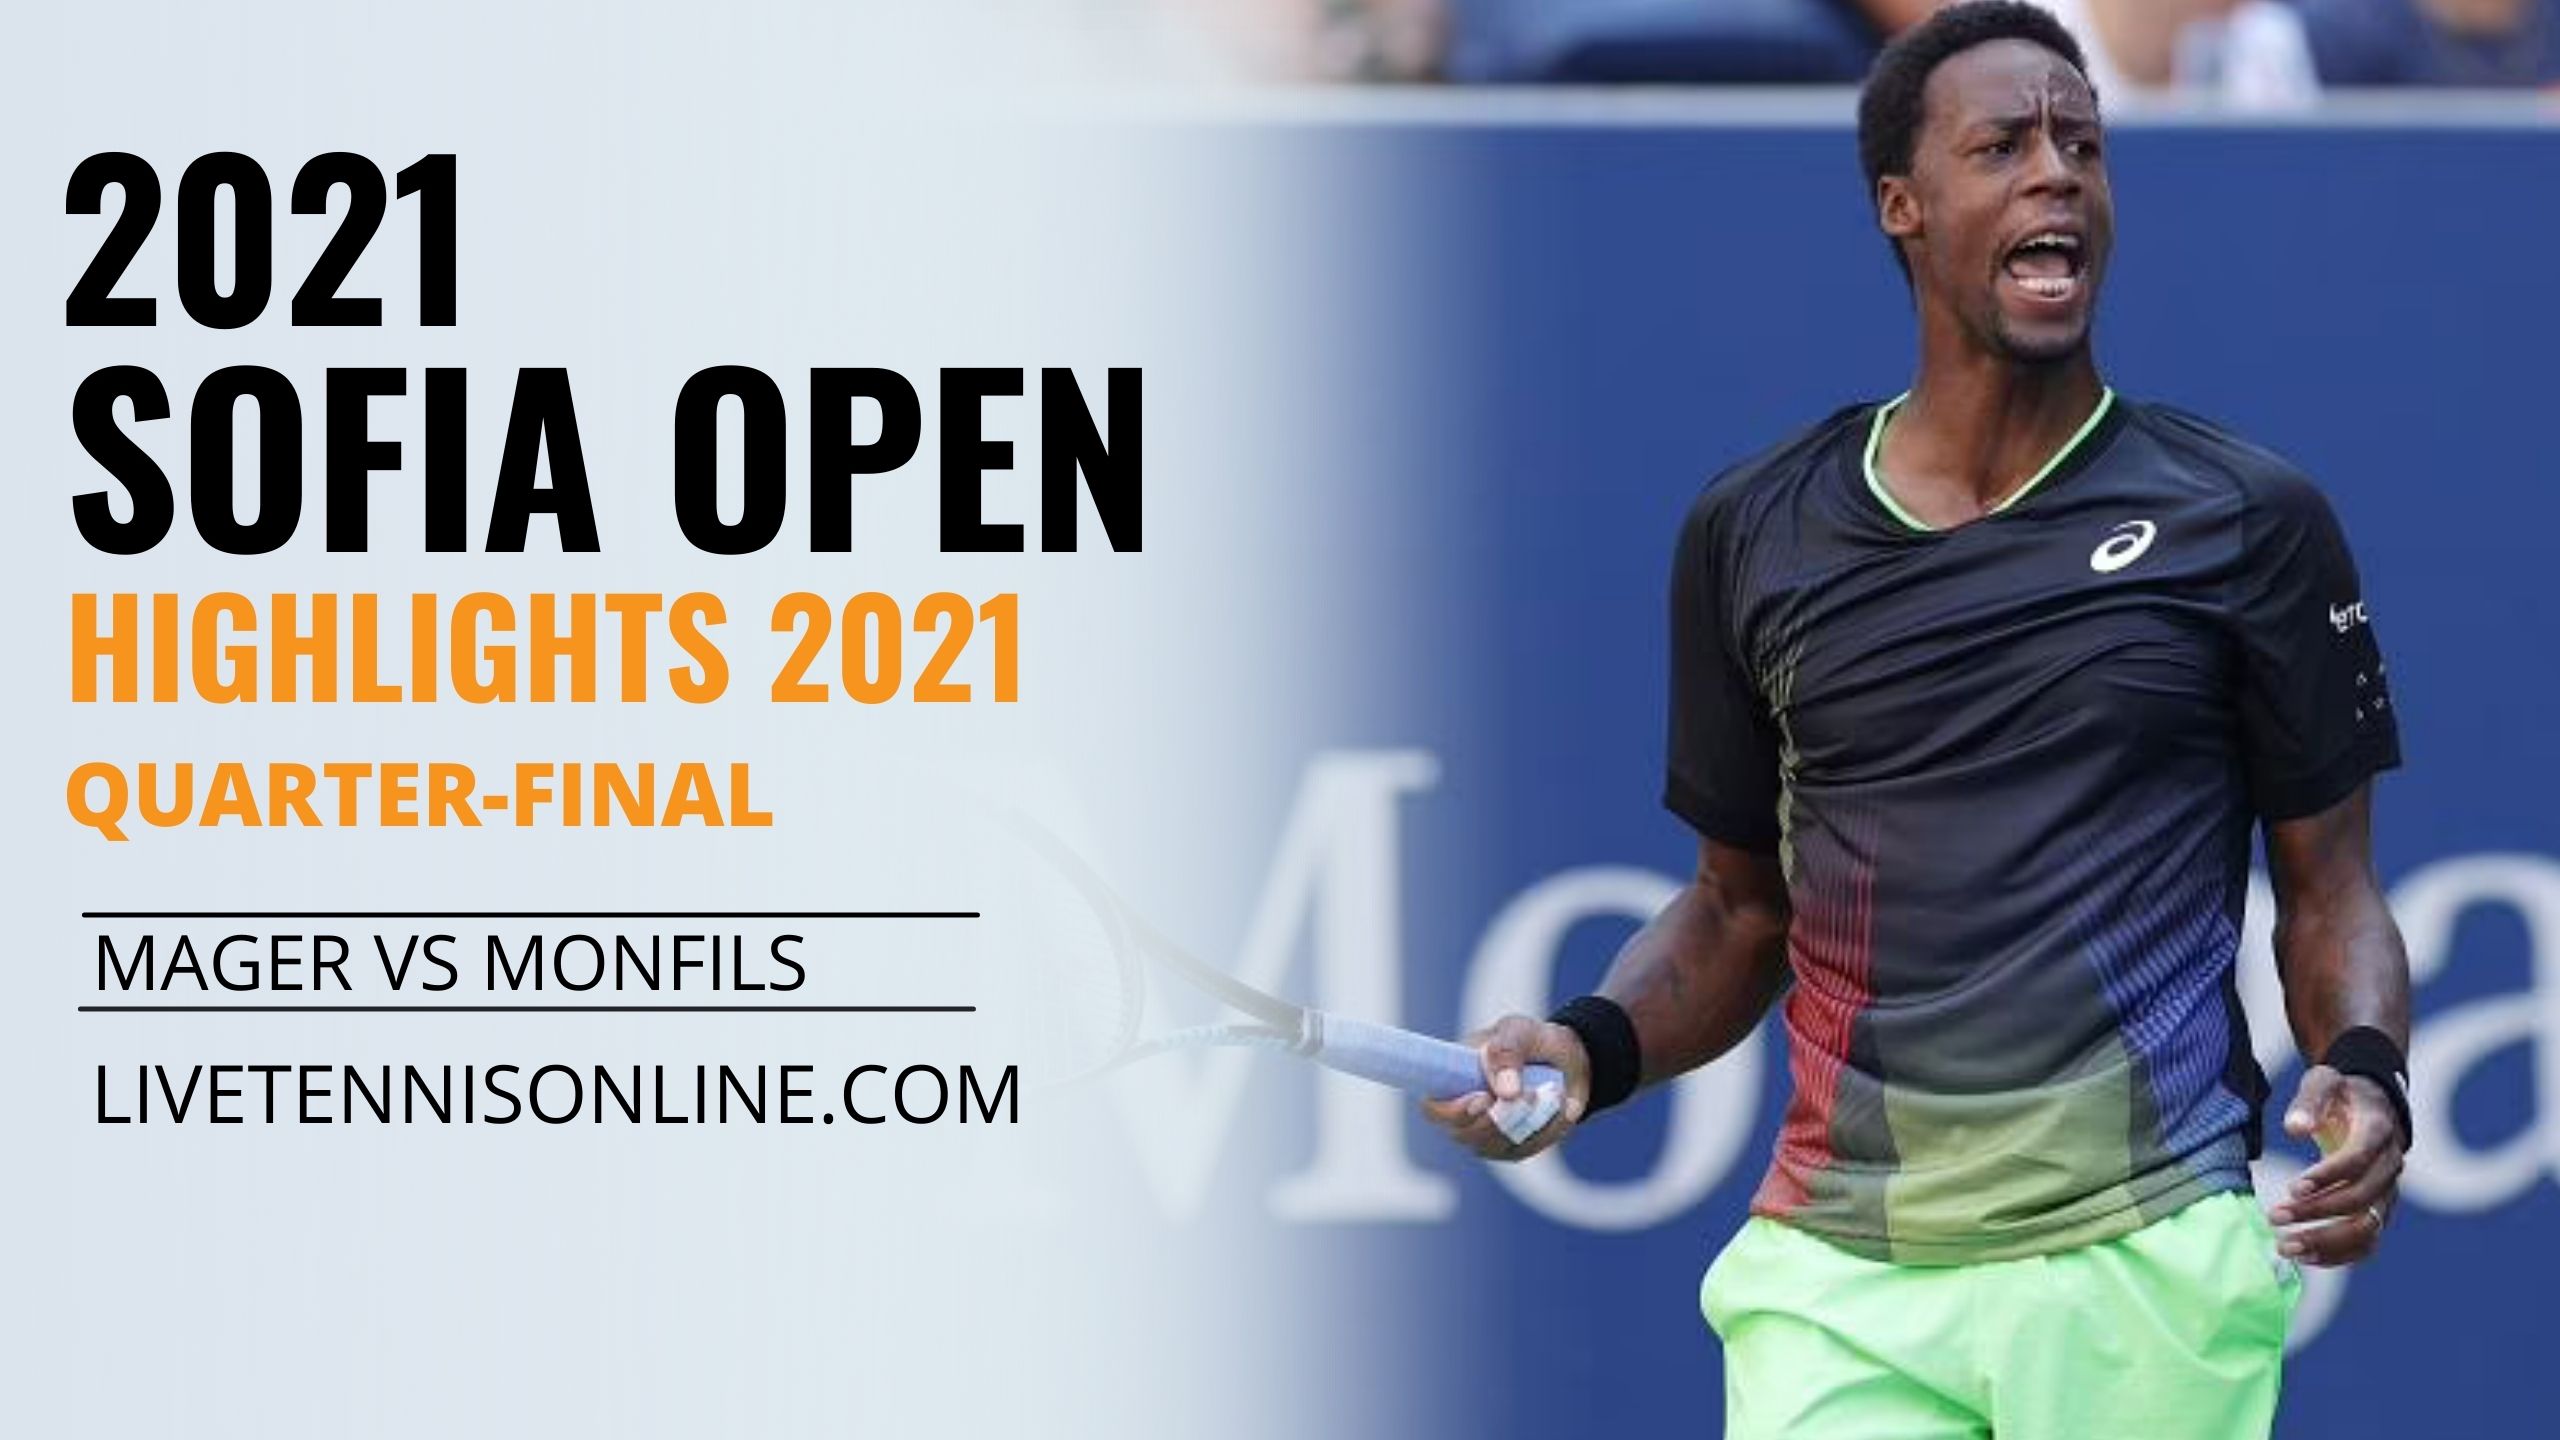 Mager Vs Monfils QF Highlights 2021